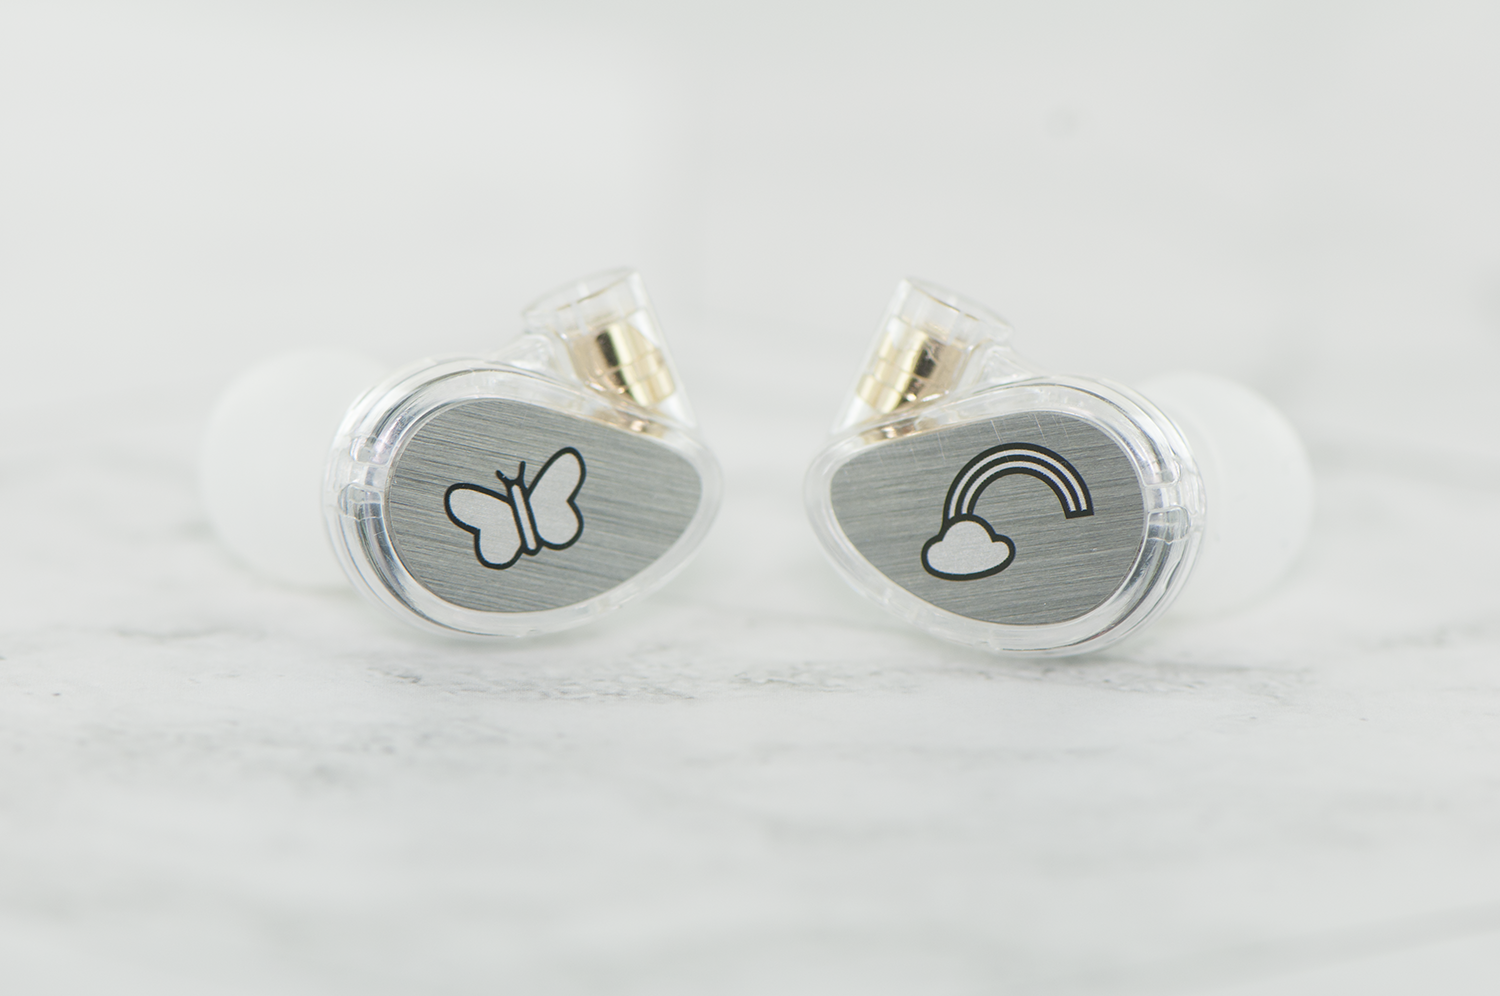 Two in-ear monitors with transparent casing, showcasing internal components and unique designsâ€”a butterfly on one, and a cloud with a rainbow on the other, on a white surface.